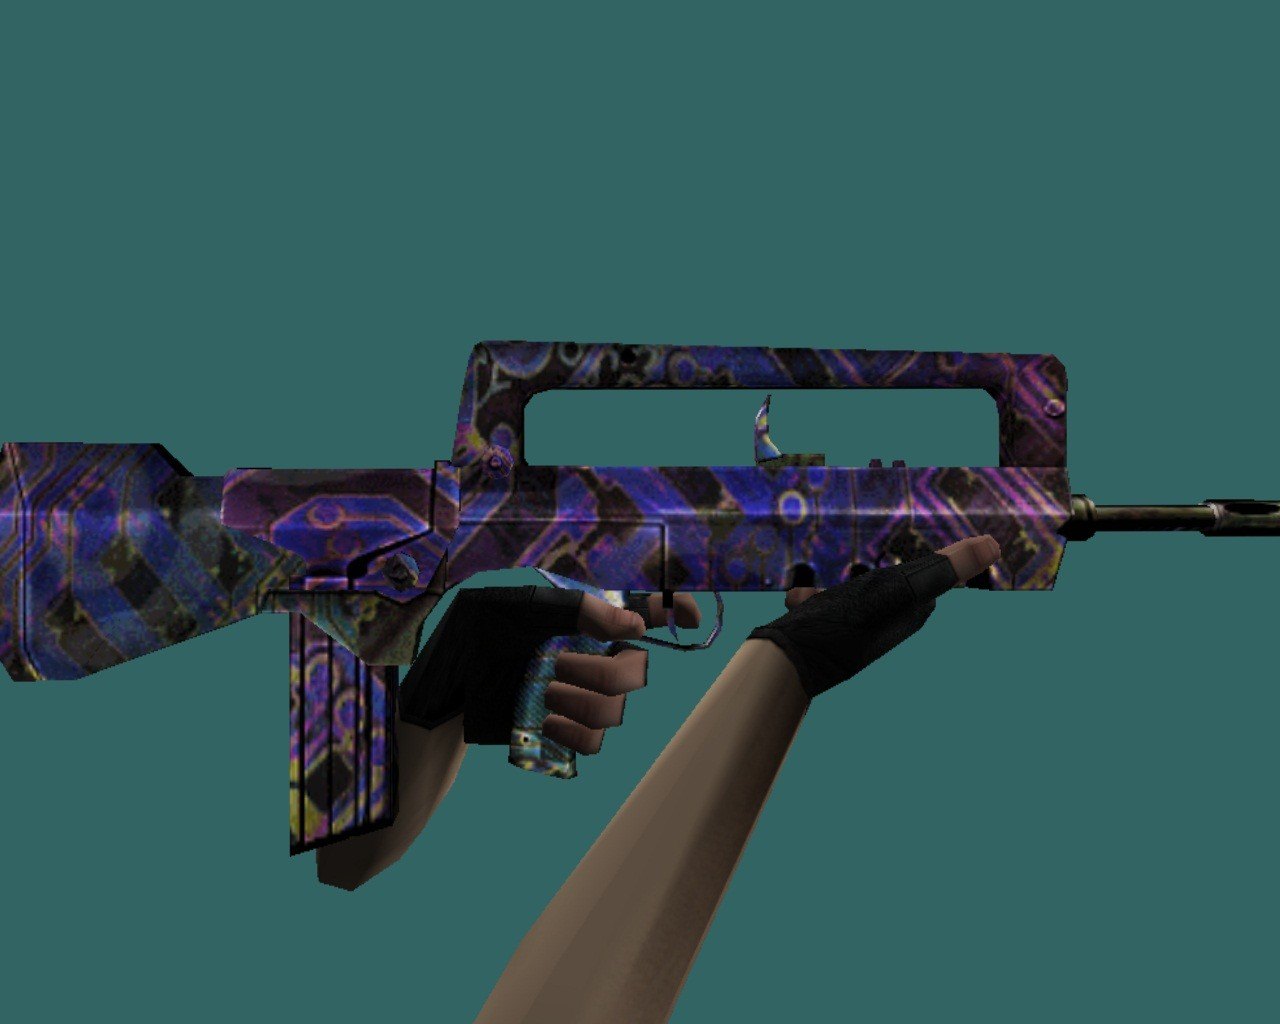 FAMAS Valence cs go skin download the last version for android